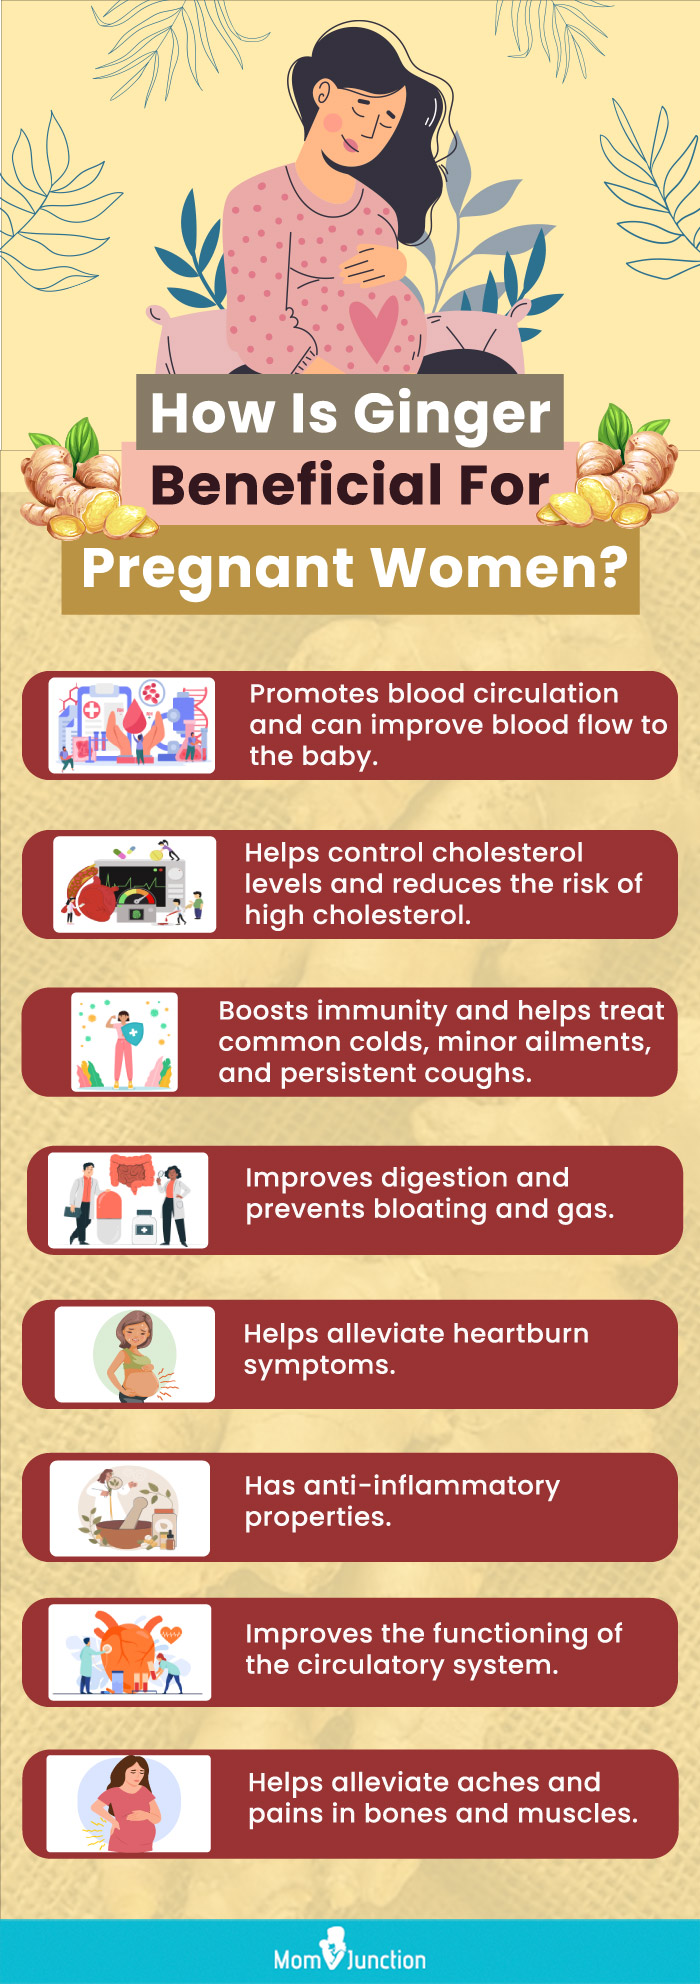 how is ginger beneficial for pregnant women (infographic)